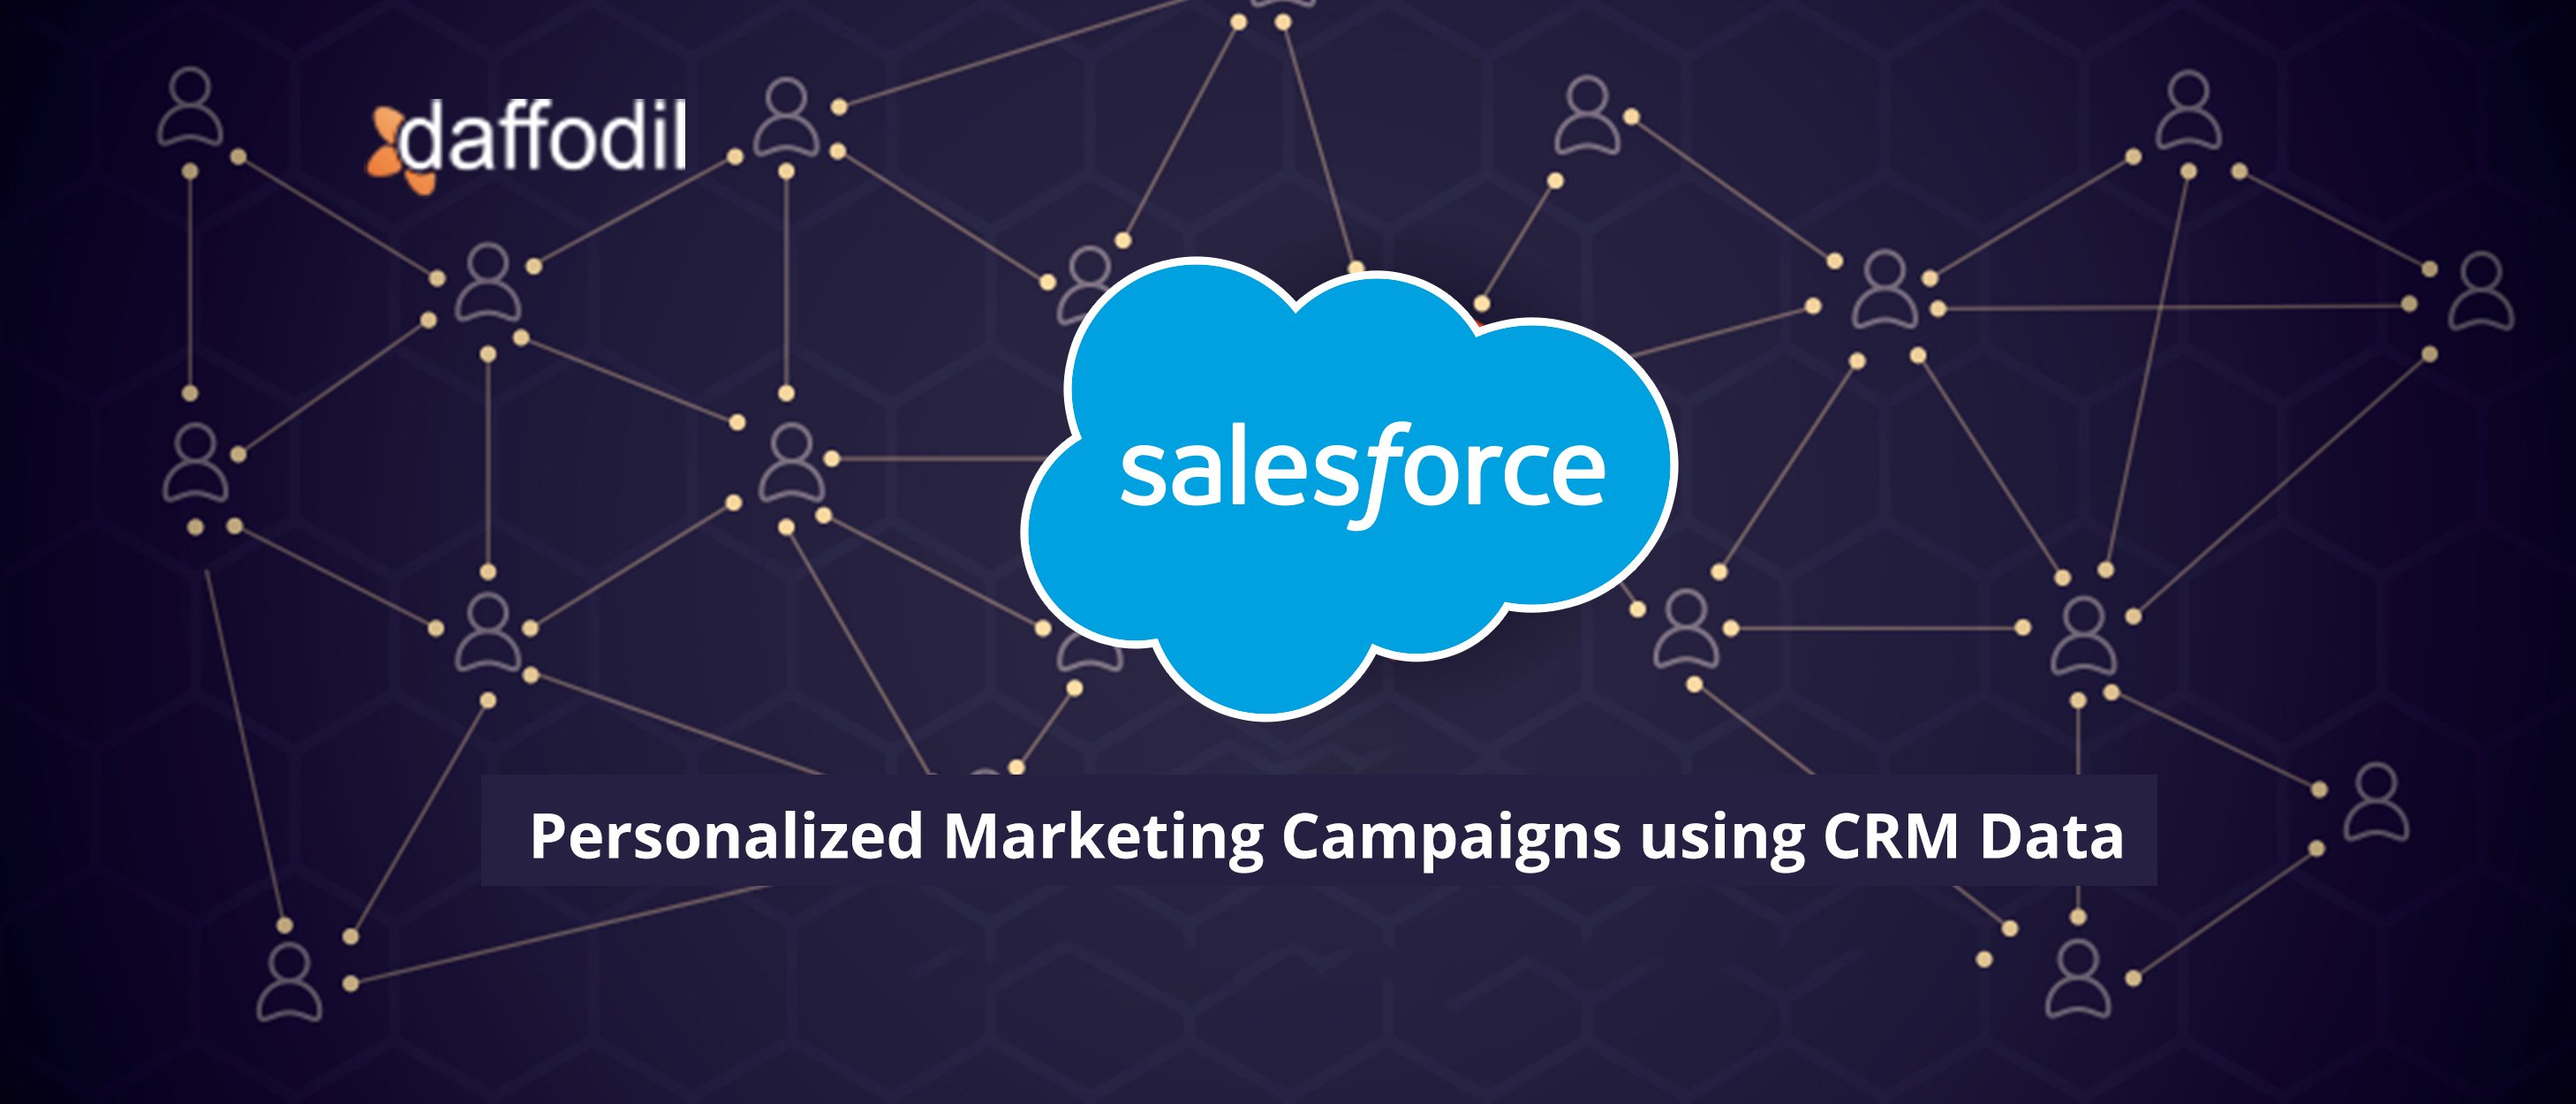 How to Create Personalized Campaigns using CRM Data_1 copy